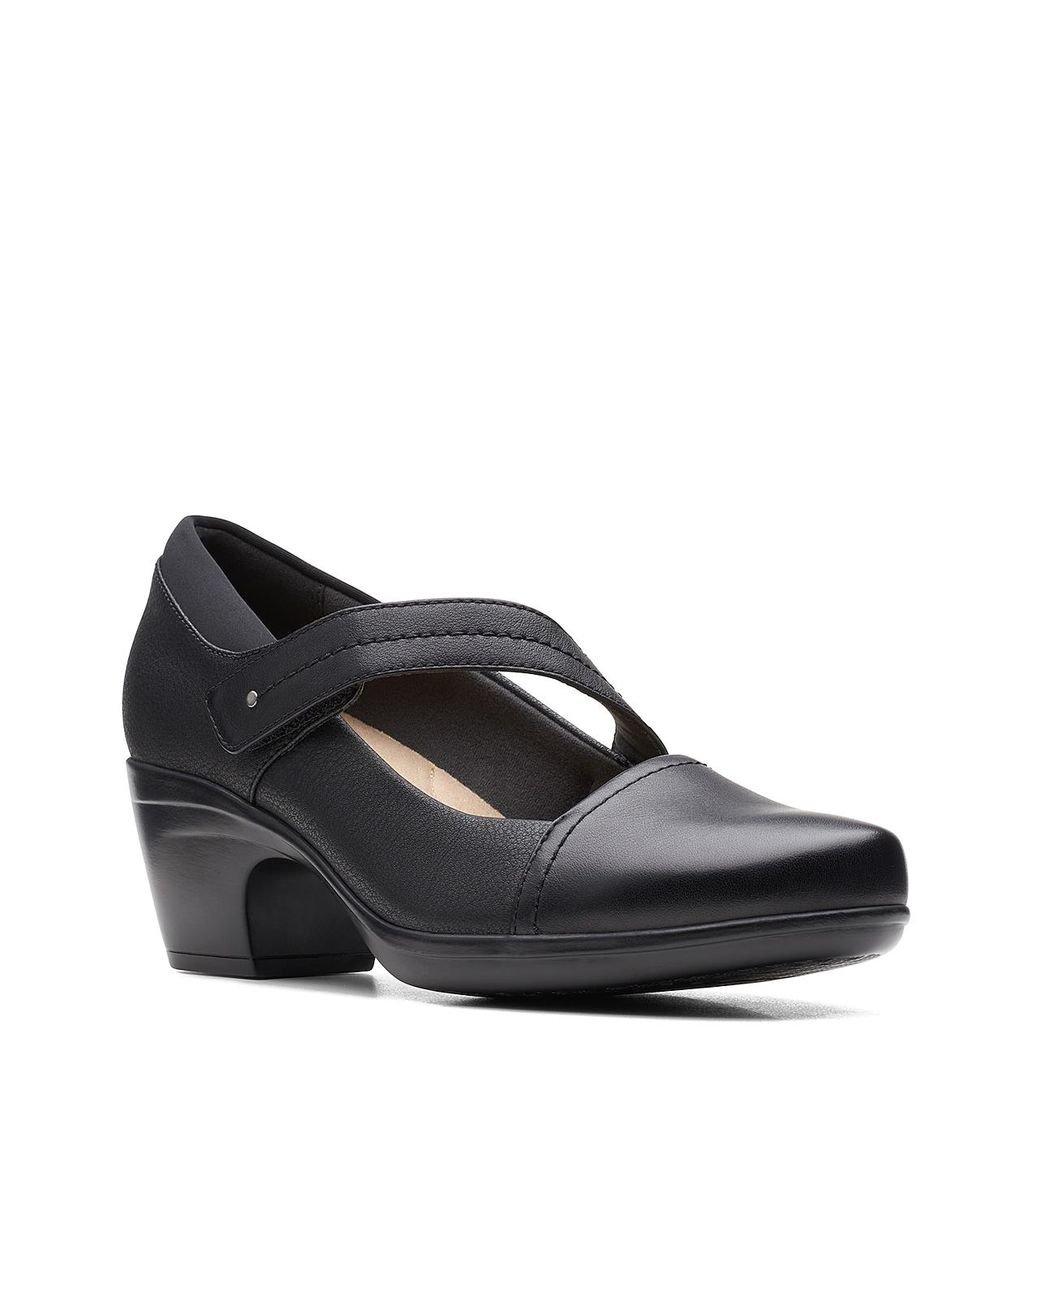 Clarks Leather Emily Pearl Mary Jane Pump in Black | Lyst